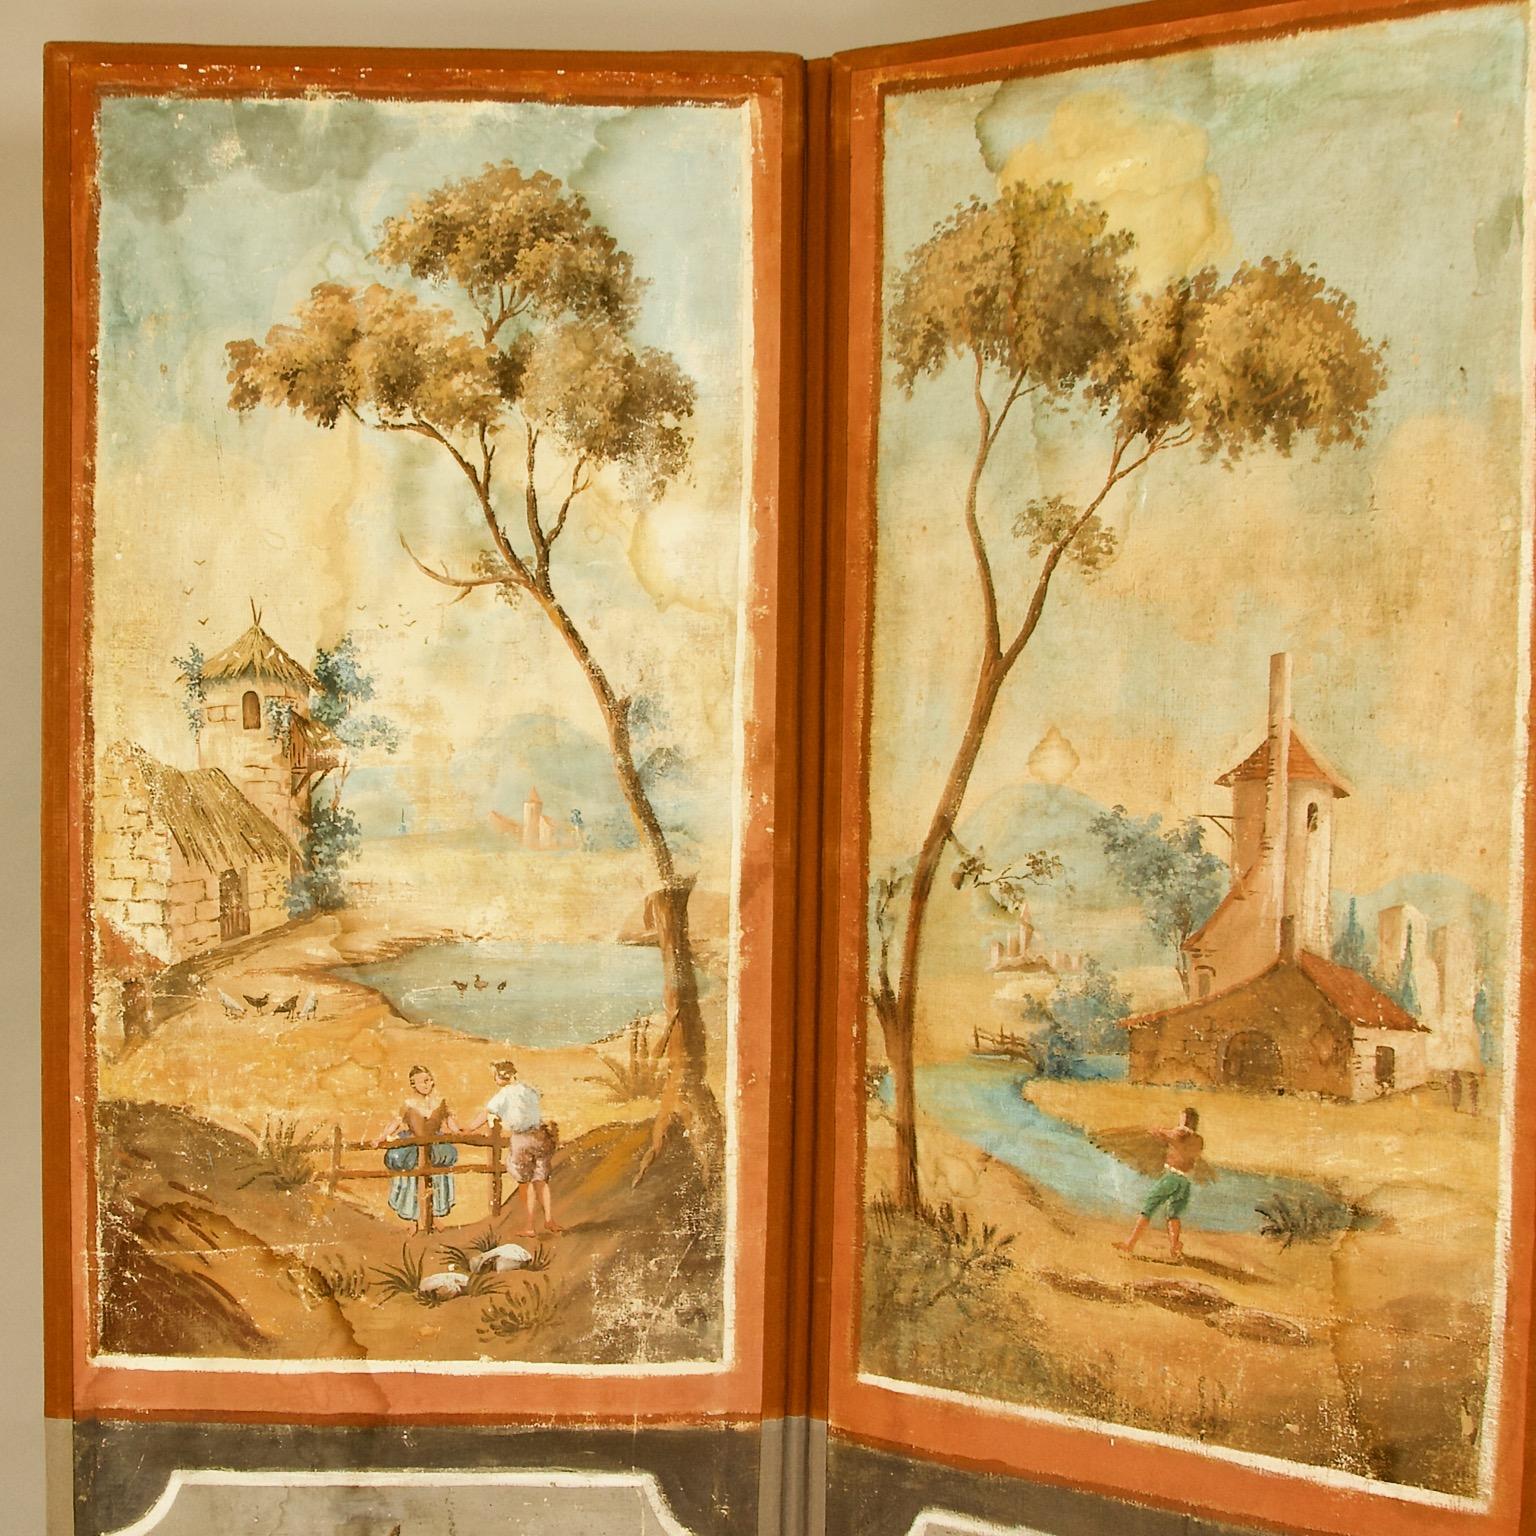 Louis XVI French 18th Century Southern Landscapes Three-Leaf Folding Screen or Paravent